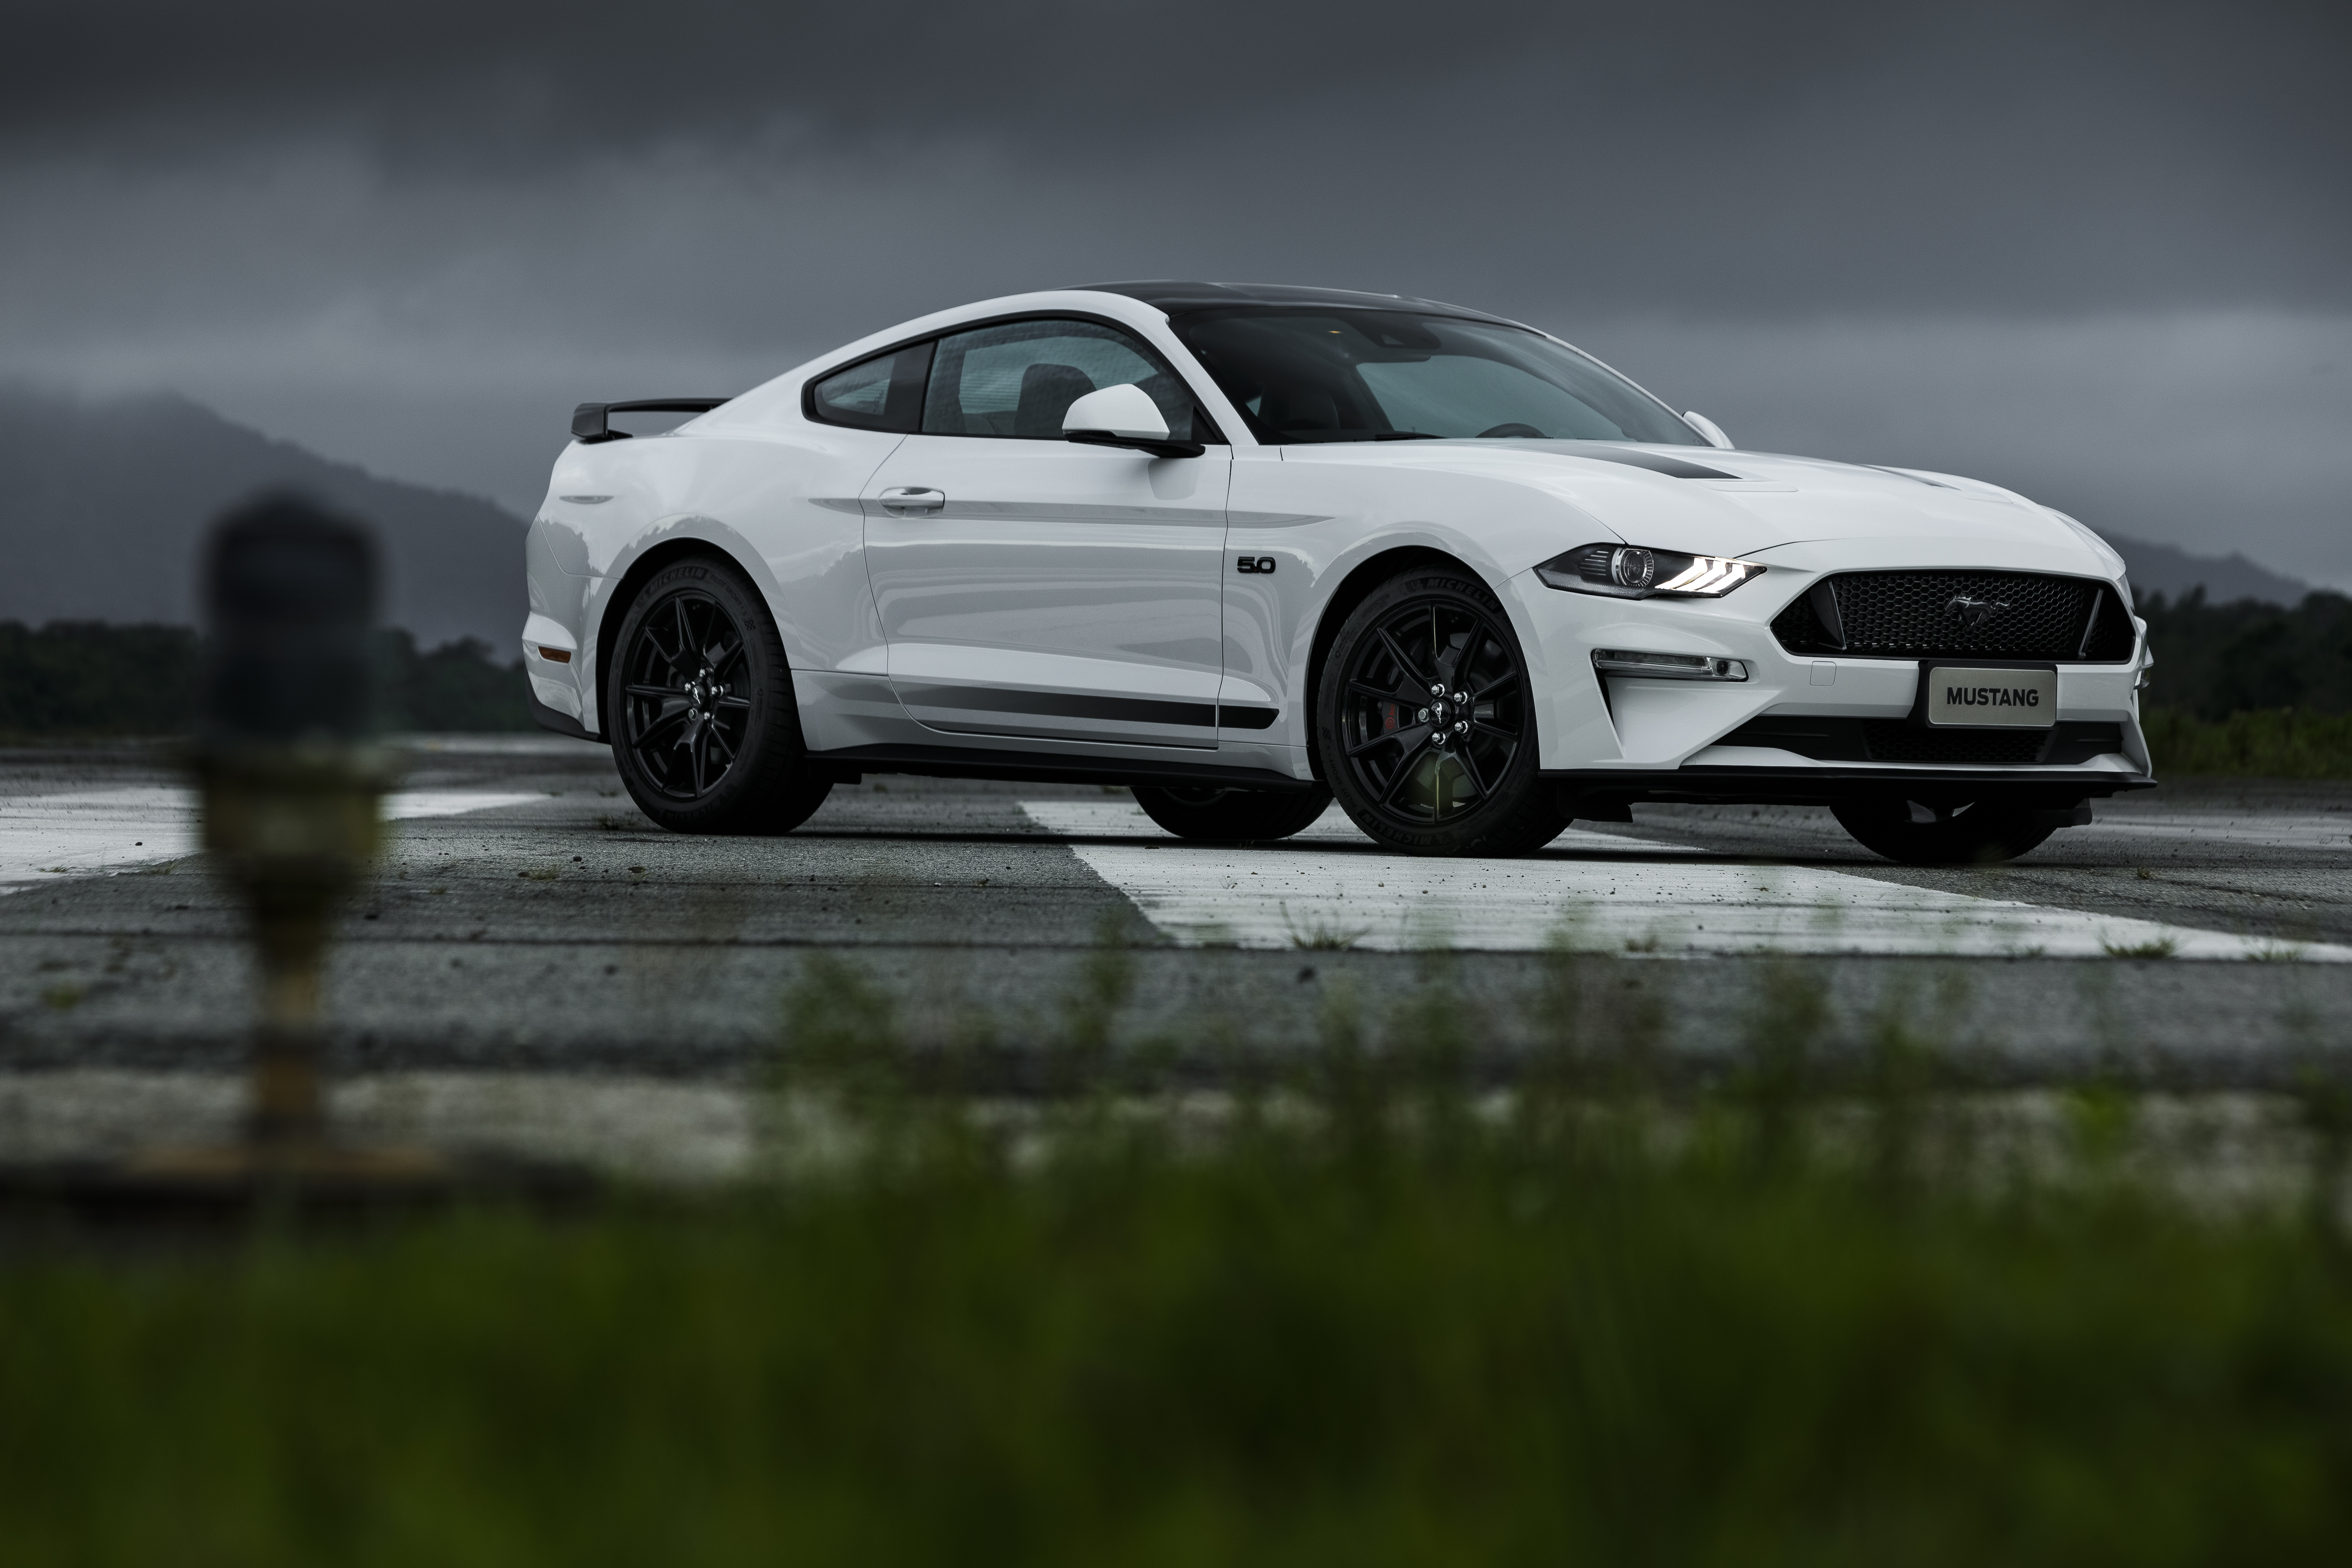 Free Ford Mustang car photos on your phone